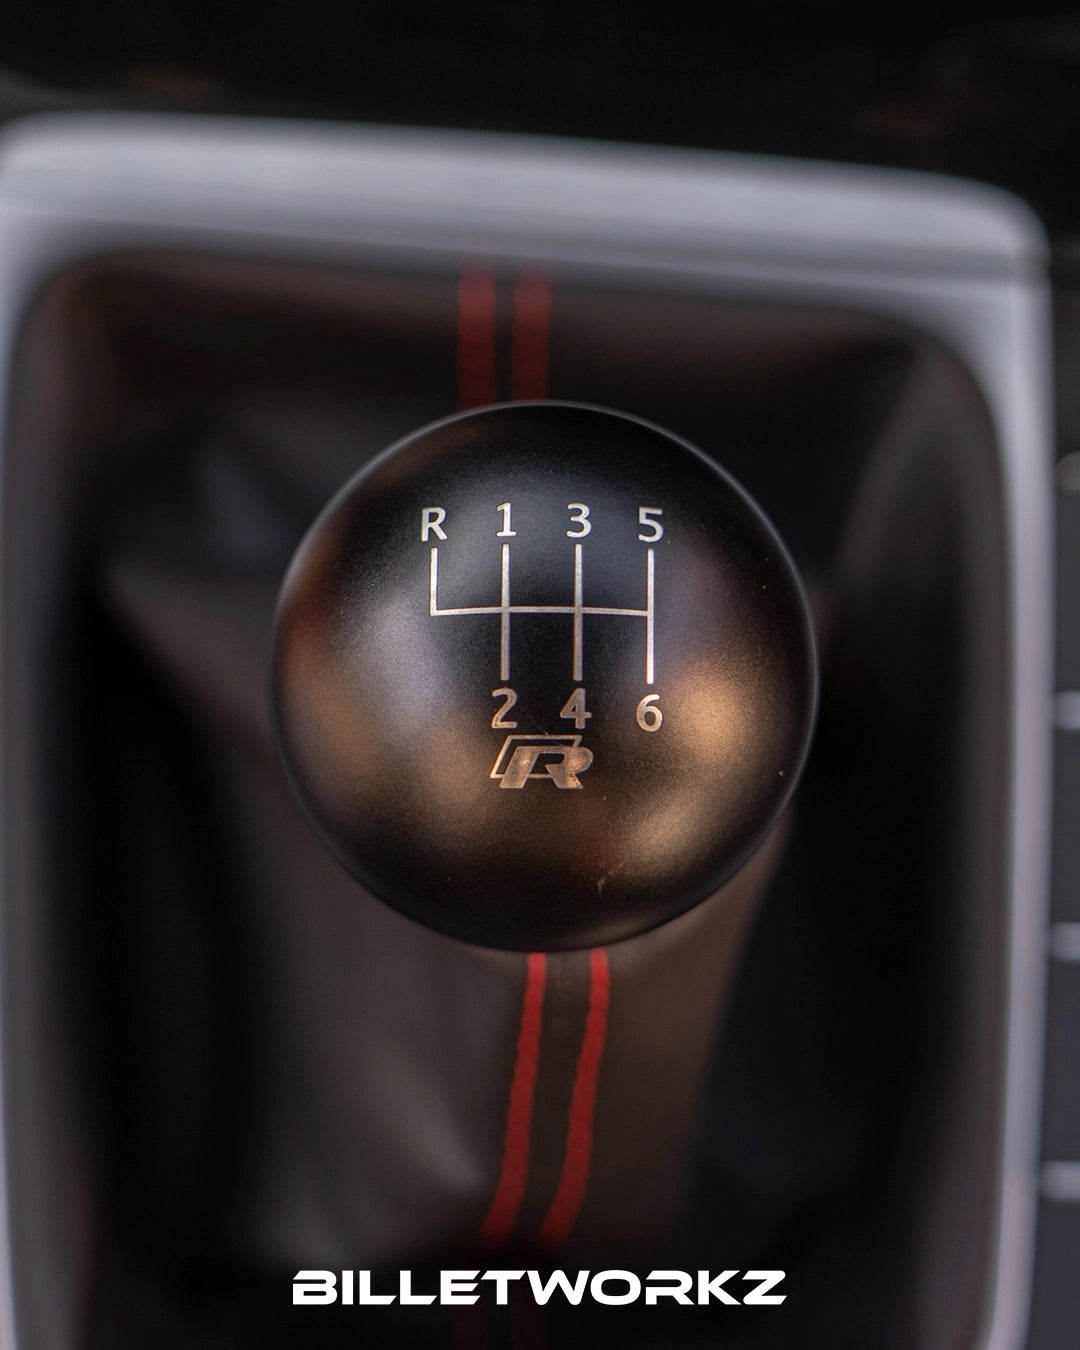 GR Weighted Shift Knob vs OEM what do y'all think? : r/GR86